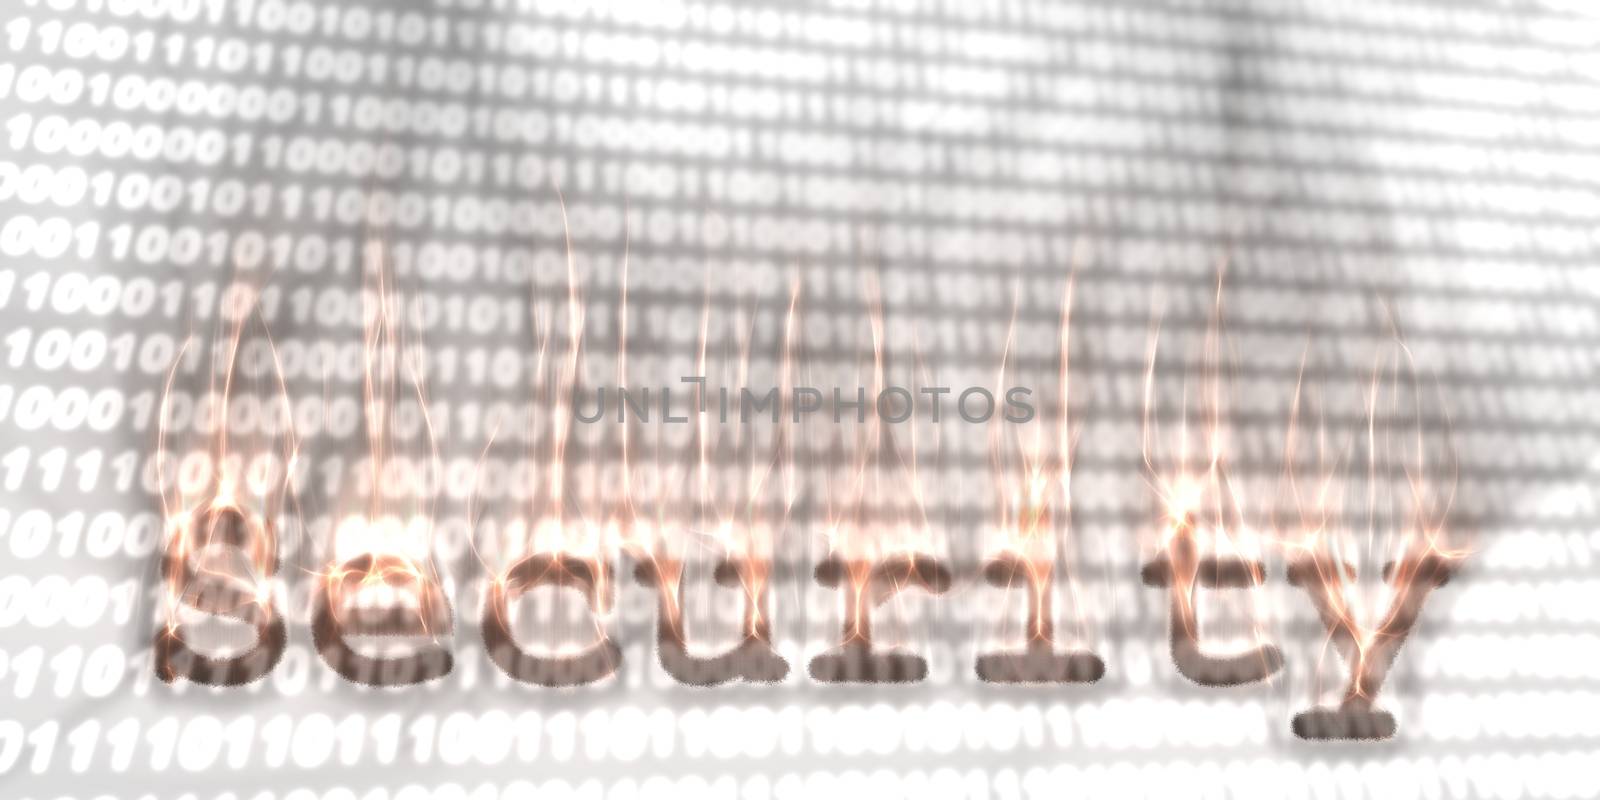 Banner of internet security buzzword text done with kirlian photography